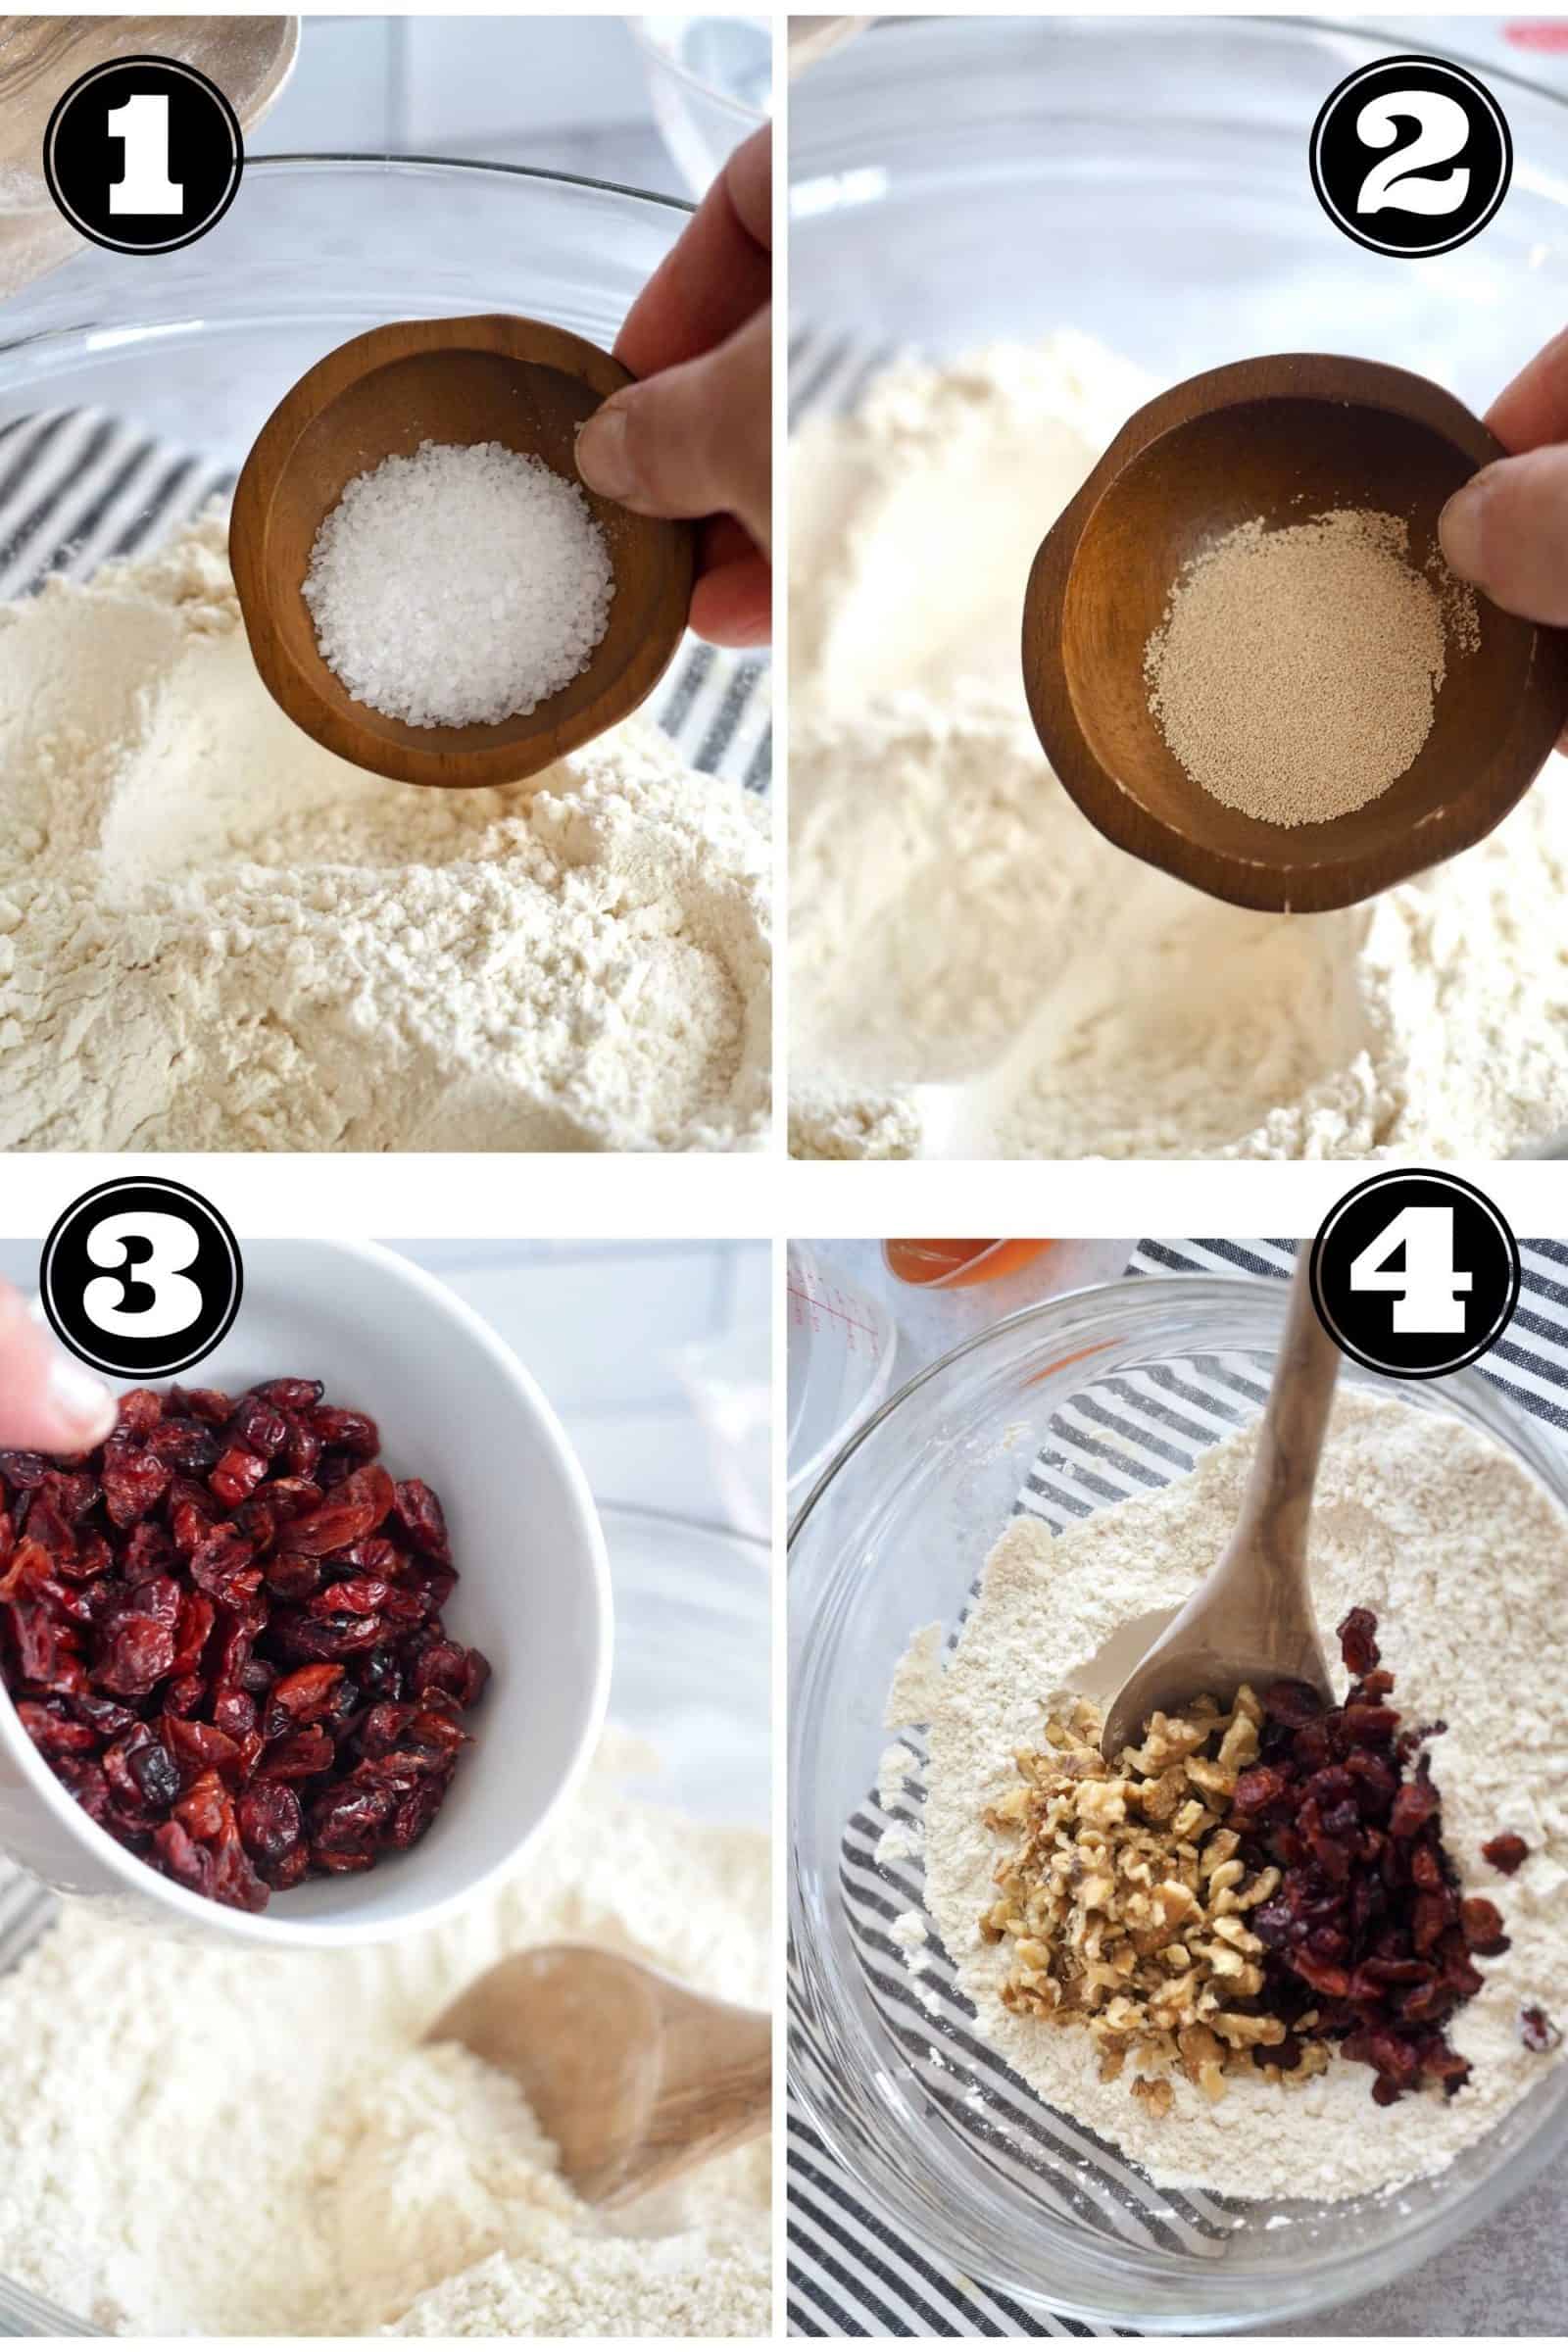 Process shots for no knead bread. 1. adding salt. 2. adding yeast. 3 adding cranberries and 4. adding walnuts and stirring into flour mixture.